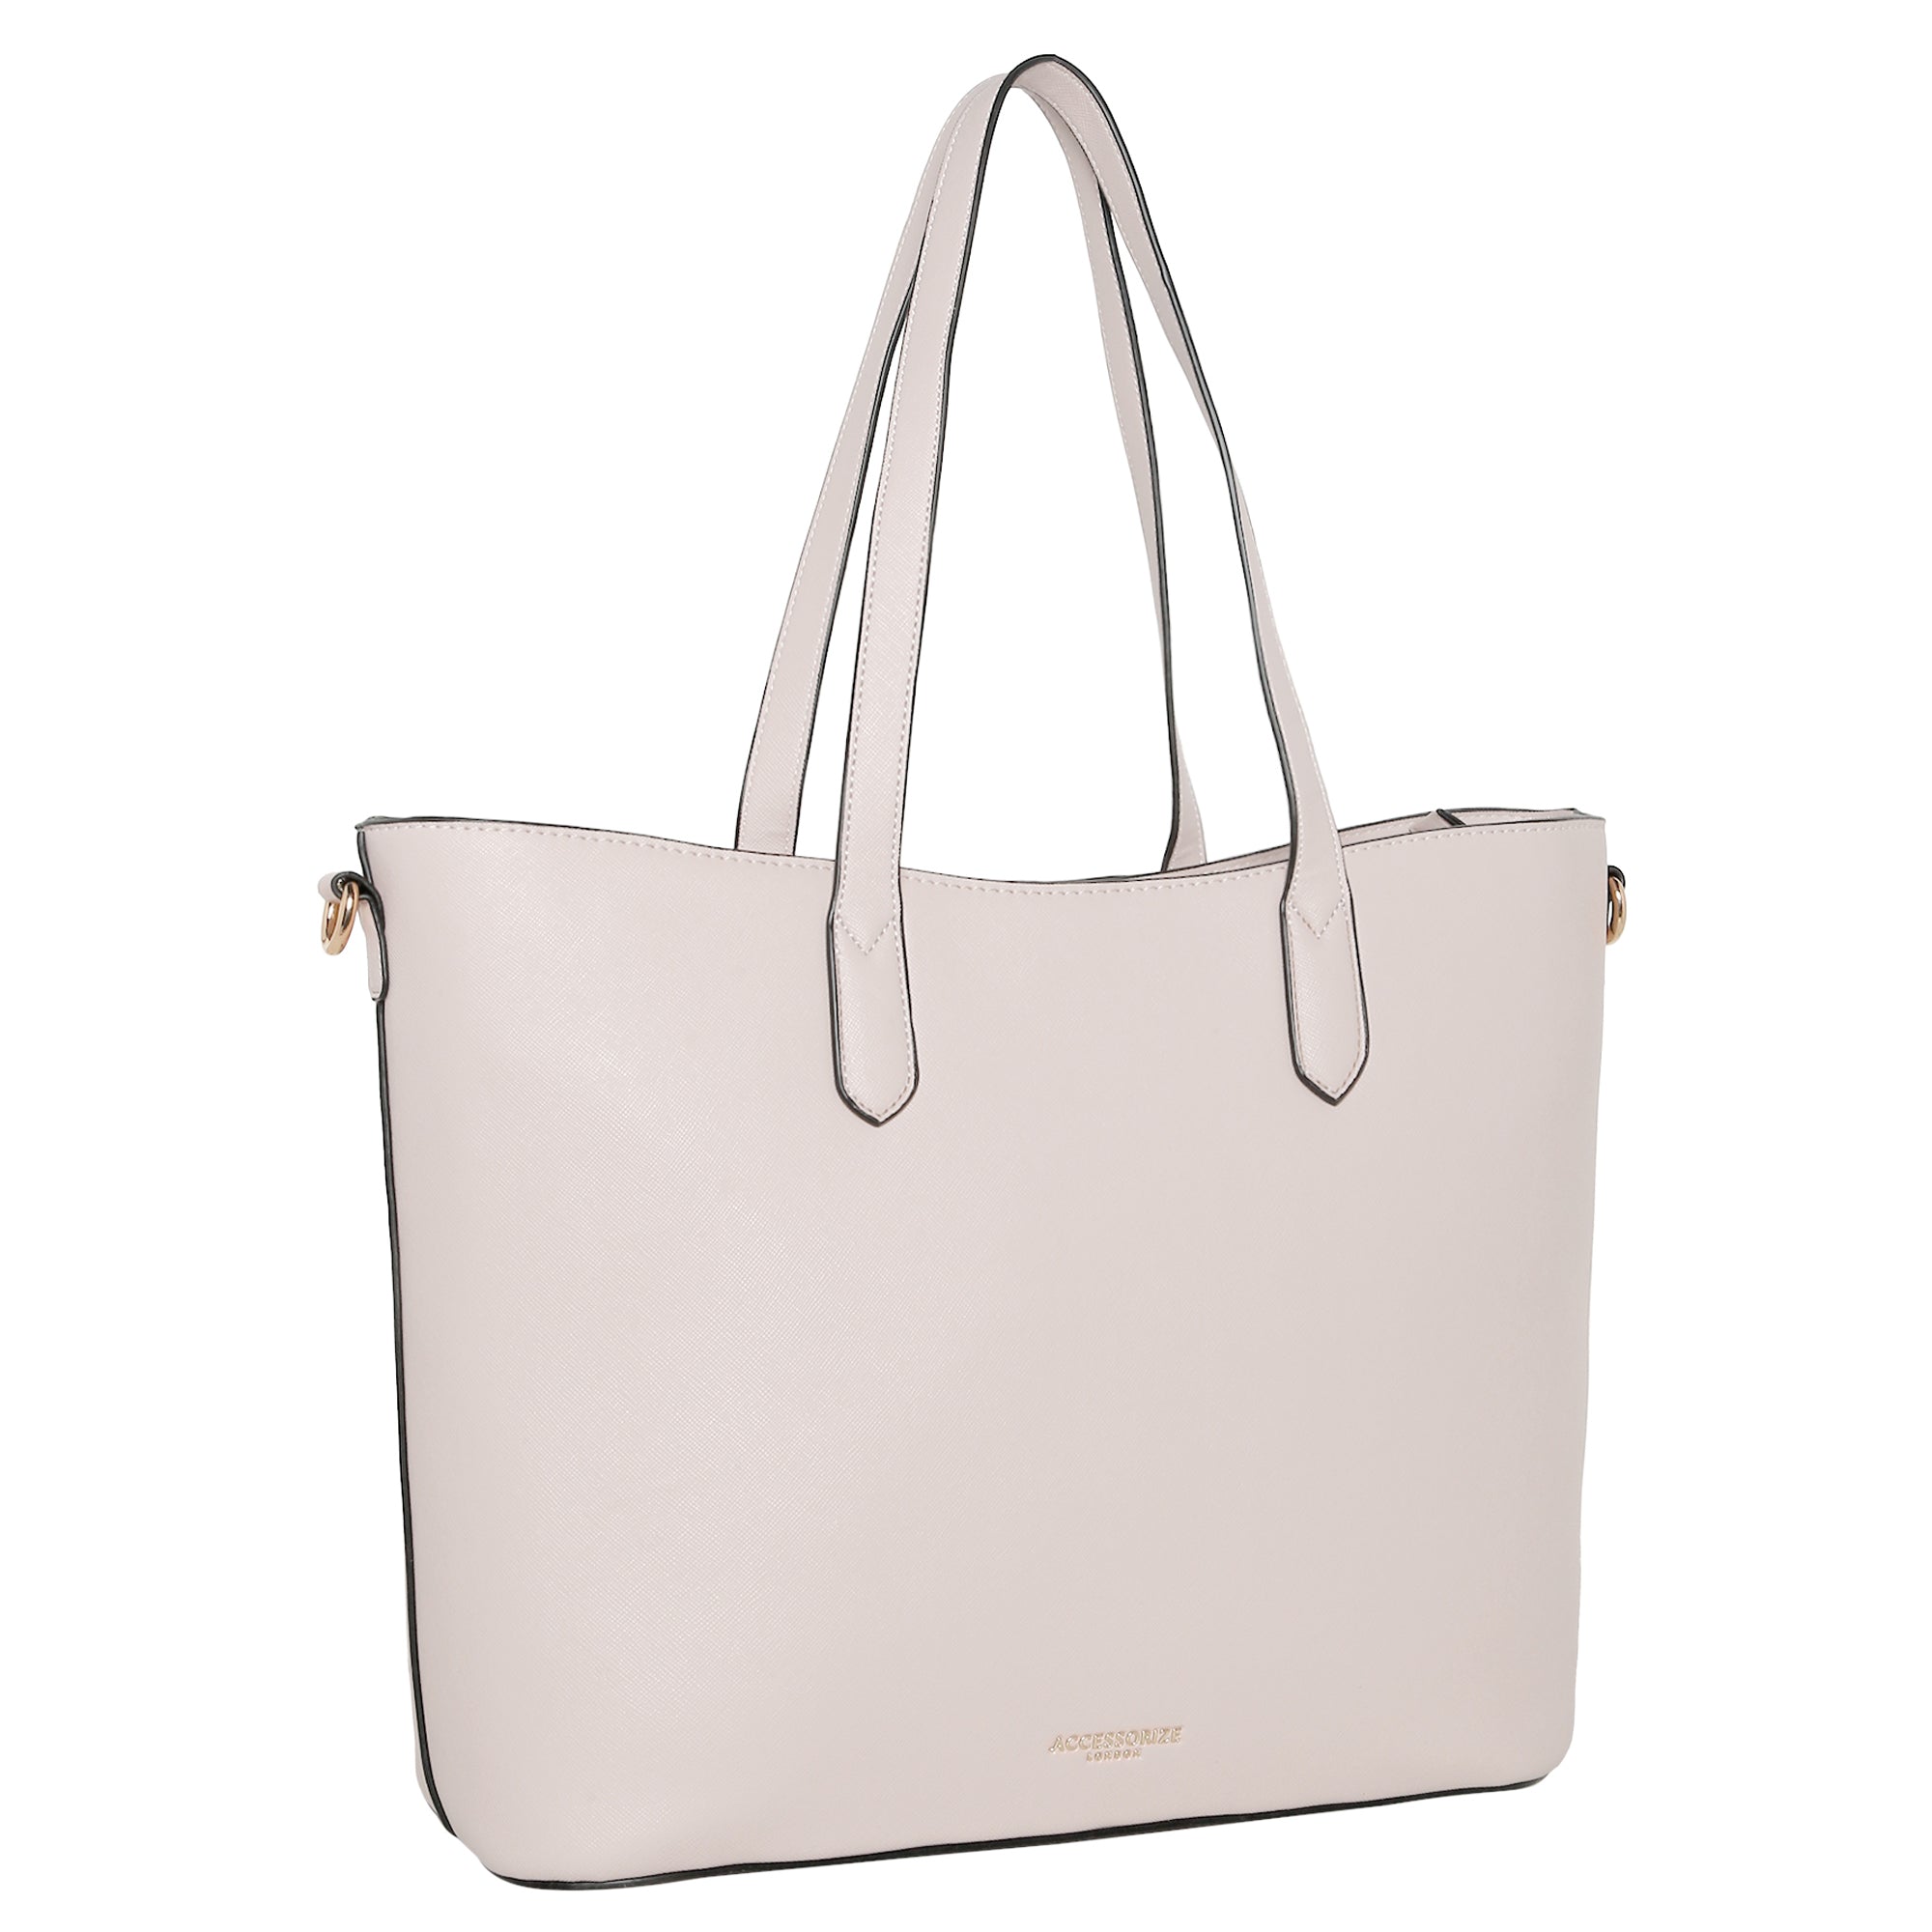 Accessorize London Women's Faux Leather Light Pink Daffodil tote bag